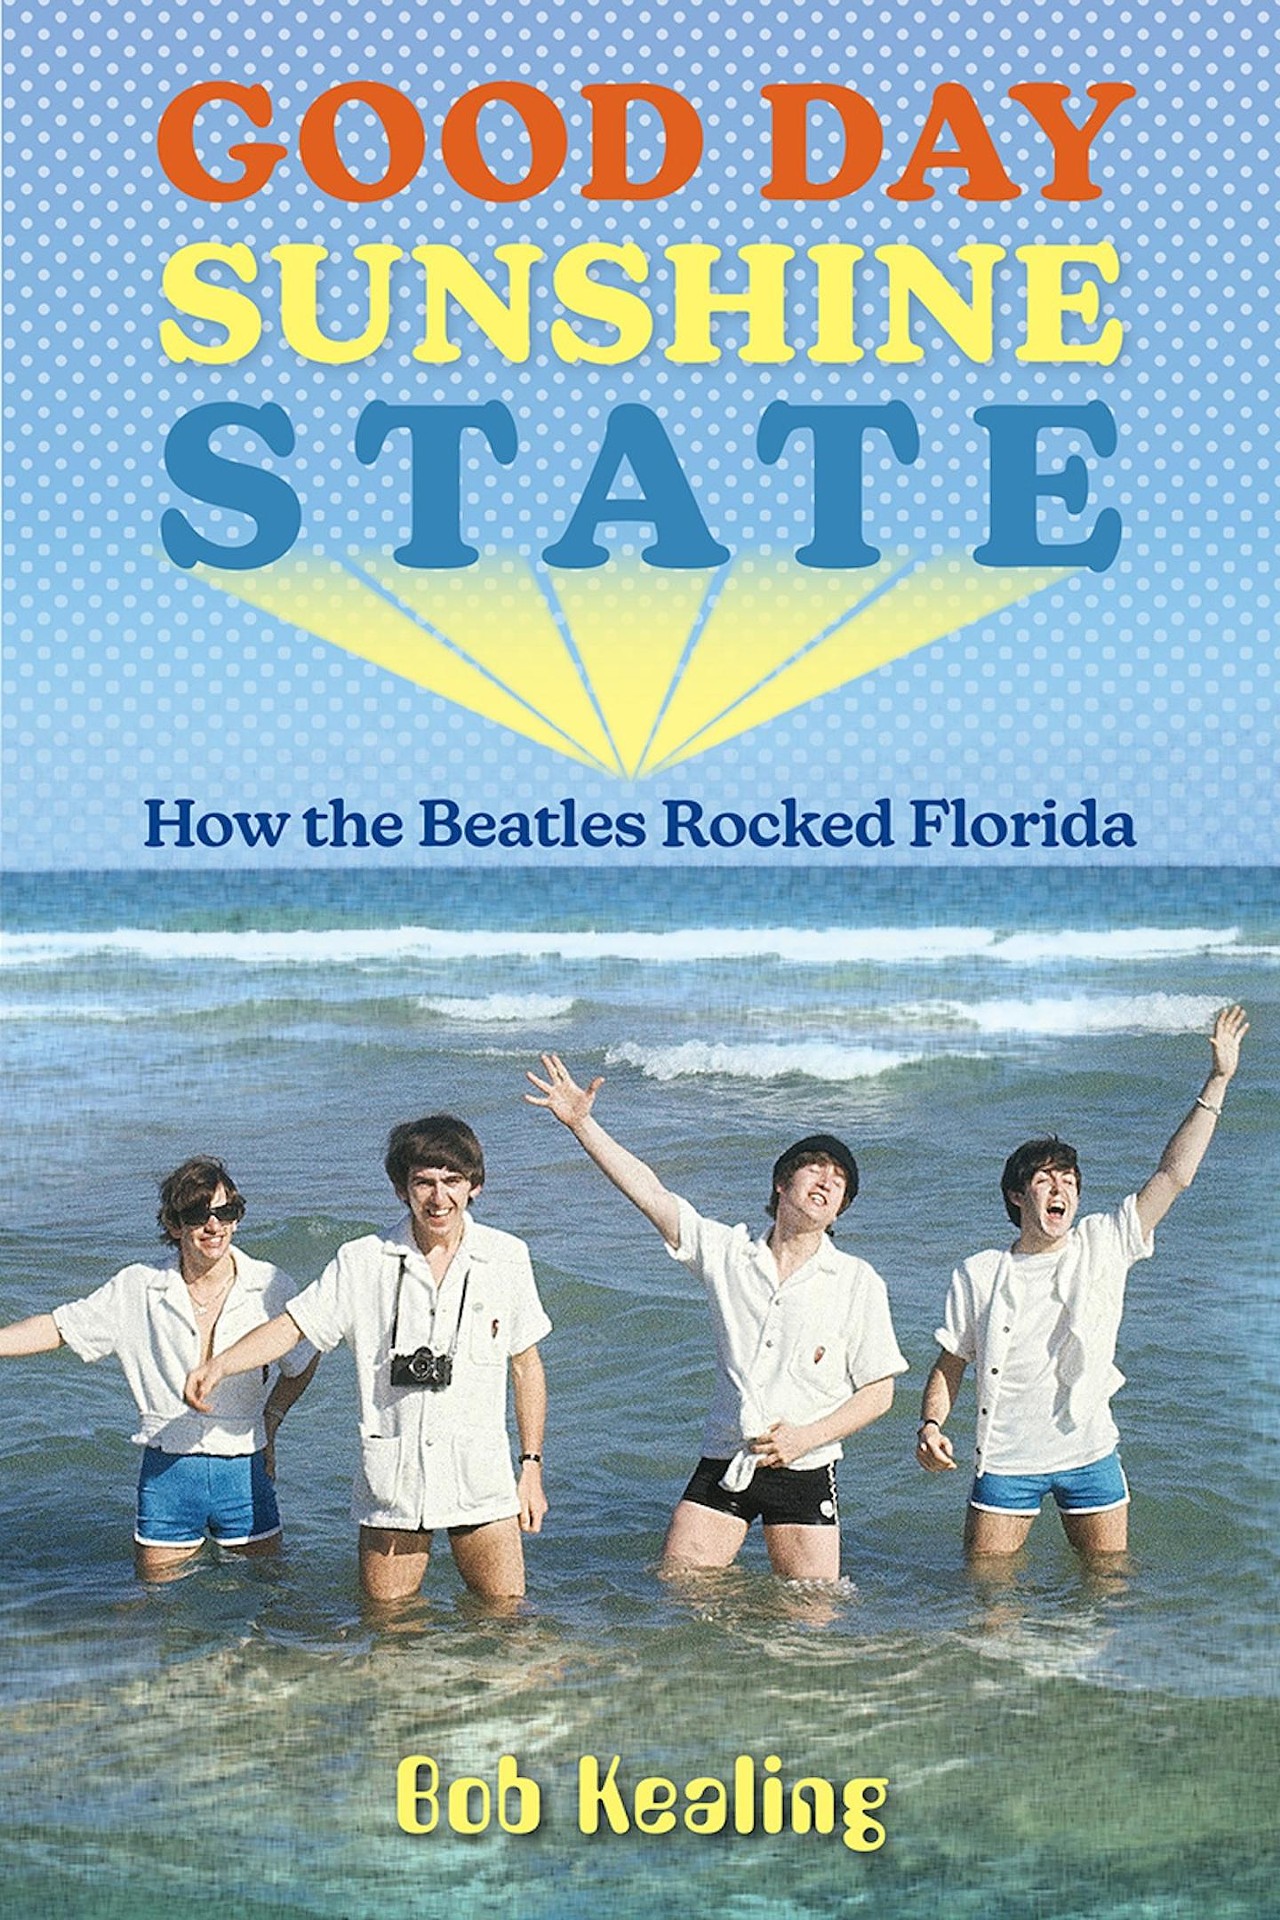 ‘Good Day Sunshine State: How The Beatles Rocked Florida’ By Bob Kealing
John, Paul, George, and Ringo’s connections to Florida go far beyond one of their “Ed Sullivan Show” appearances taking place in Miami, you know. In this tell-all, Emmy-winning music historian and ex-radio broadcaster Kealing dives deep into tales of how the Fab Four took over the lives of future Florida-bred music icons like Tom Petty and The Allman Brothers in the blink of an eye. He also covers a few tidbits about Miami-based journalist Larry Kane—the only person who got to cover every single show on The Beatles’ first U.S. tour—getting verbally berated by John Lennon and hit on by manager Brian Epstein, and of course, the boys fighting for an integrated audience at their show at Jacksonville’s Gator Bowl, which turned out to be their only non-televised appearance in Florida.
(University Press of Florida)—Josh Bradley
Photo via University Press of Florida